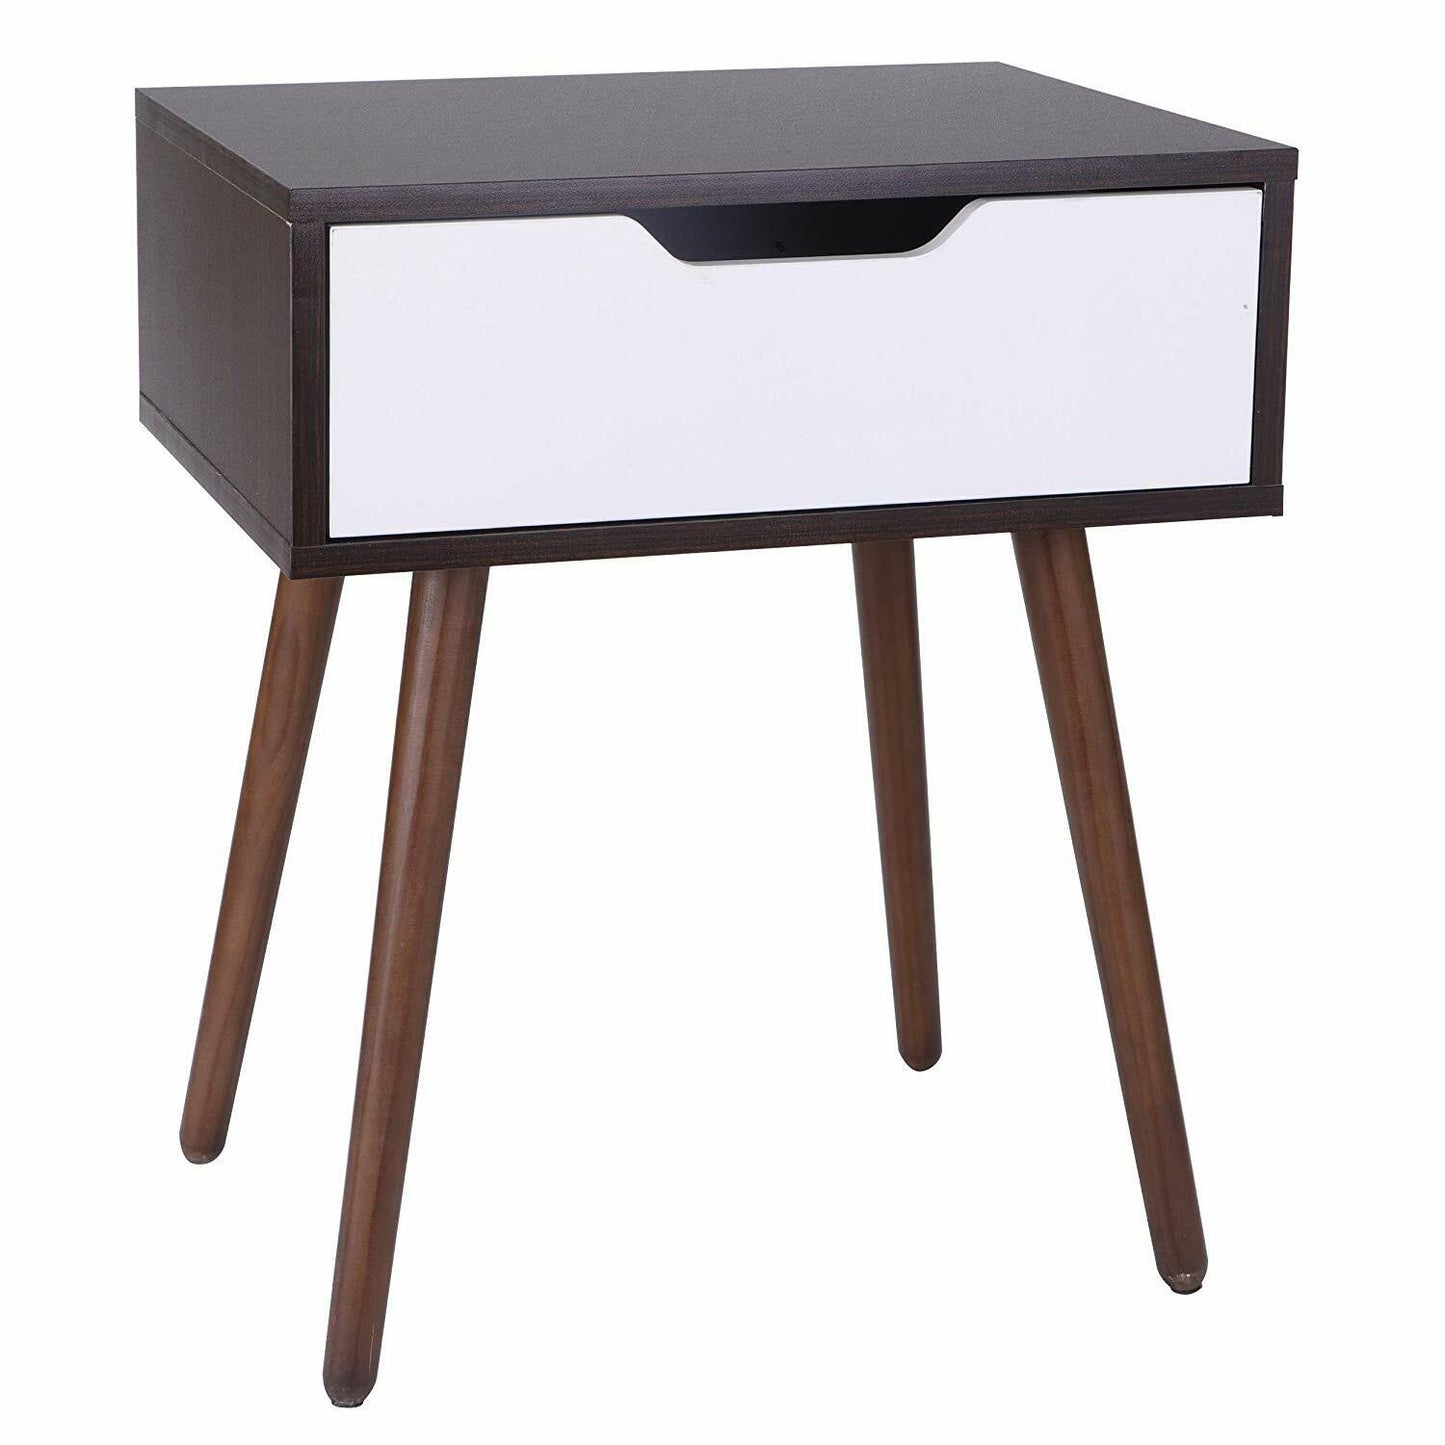 Fashion Wooden Side End Table w/Drawer for Small Space, Living Room, Bedroom